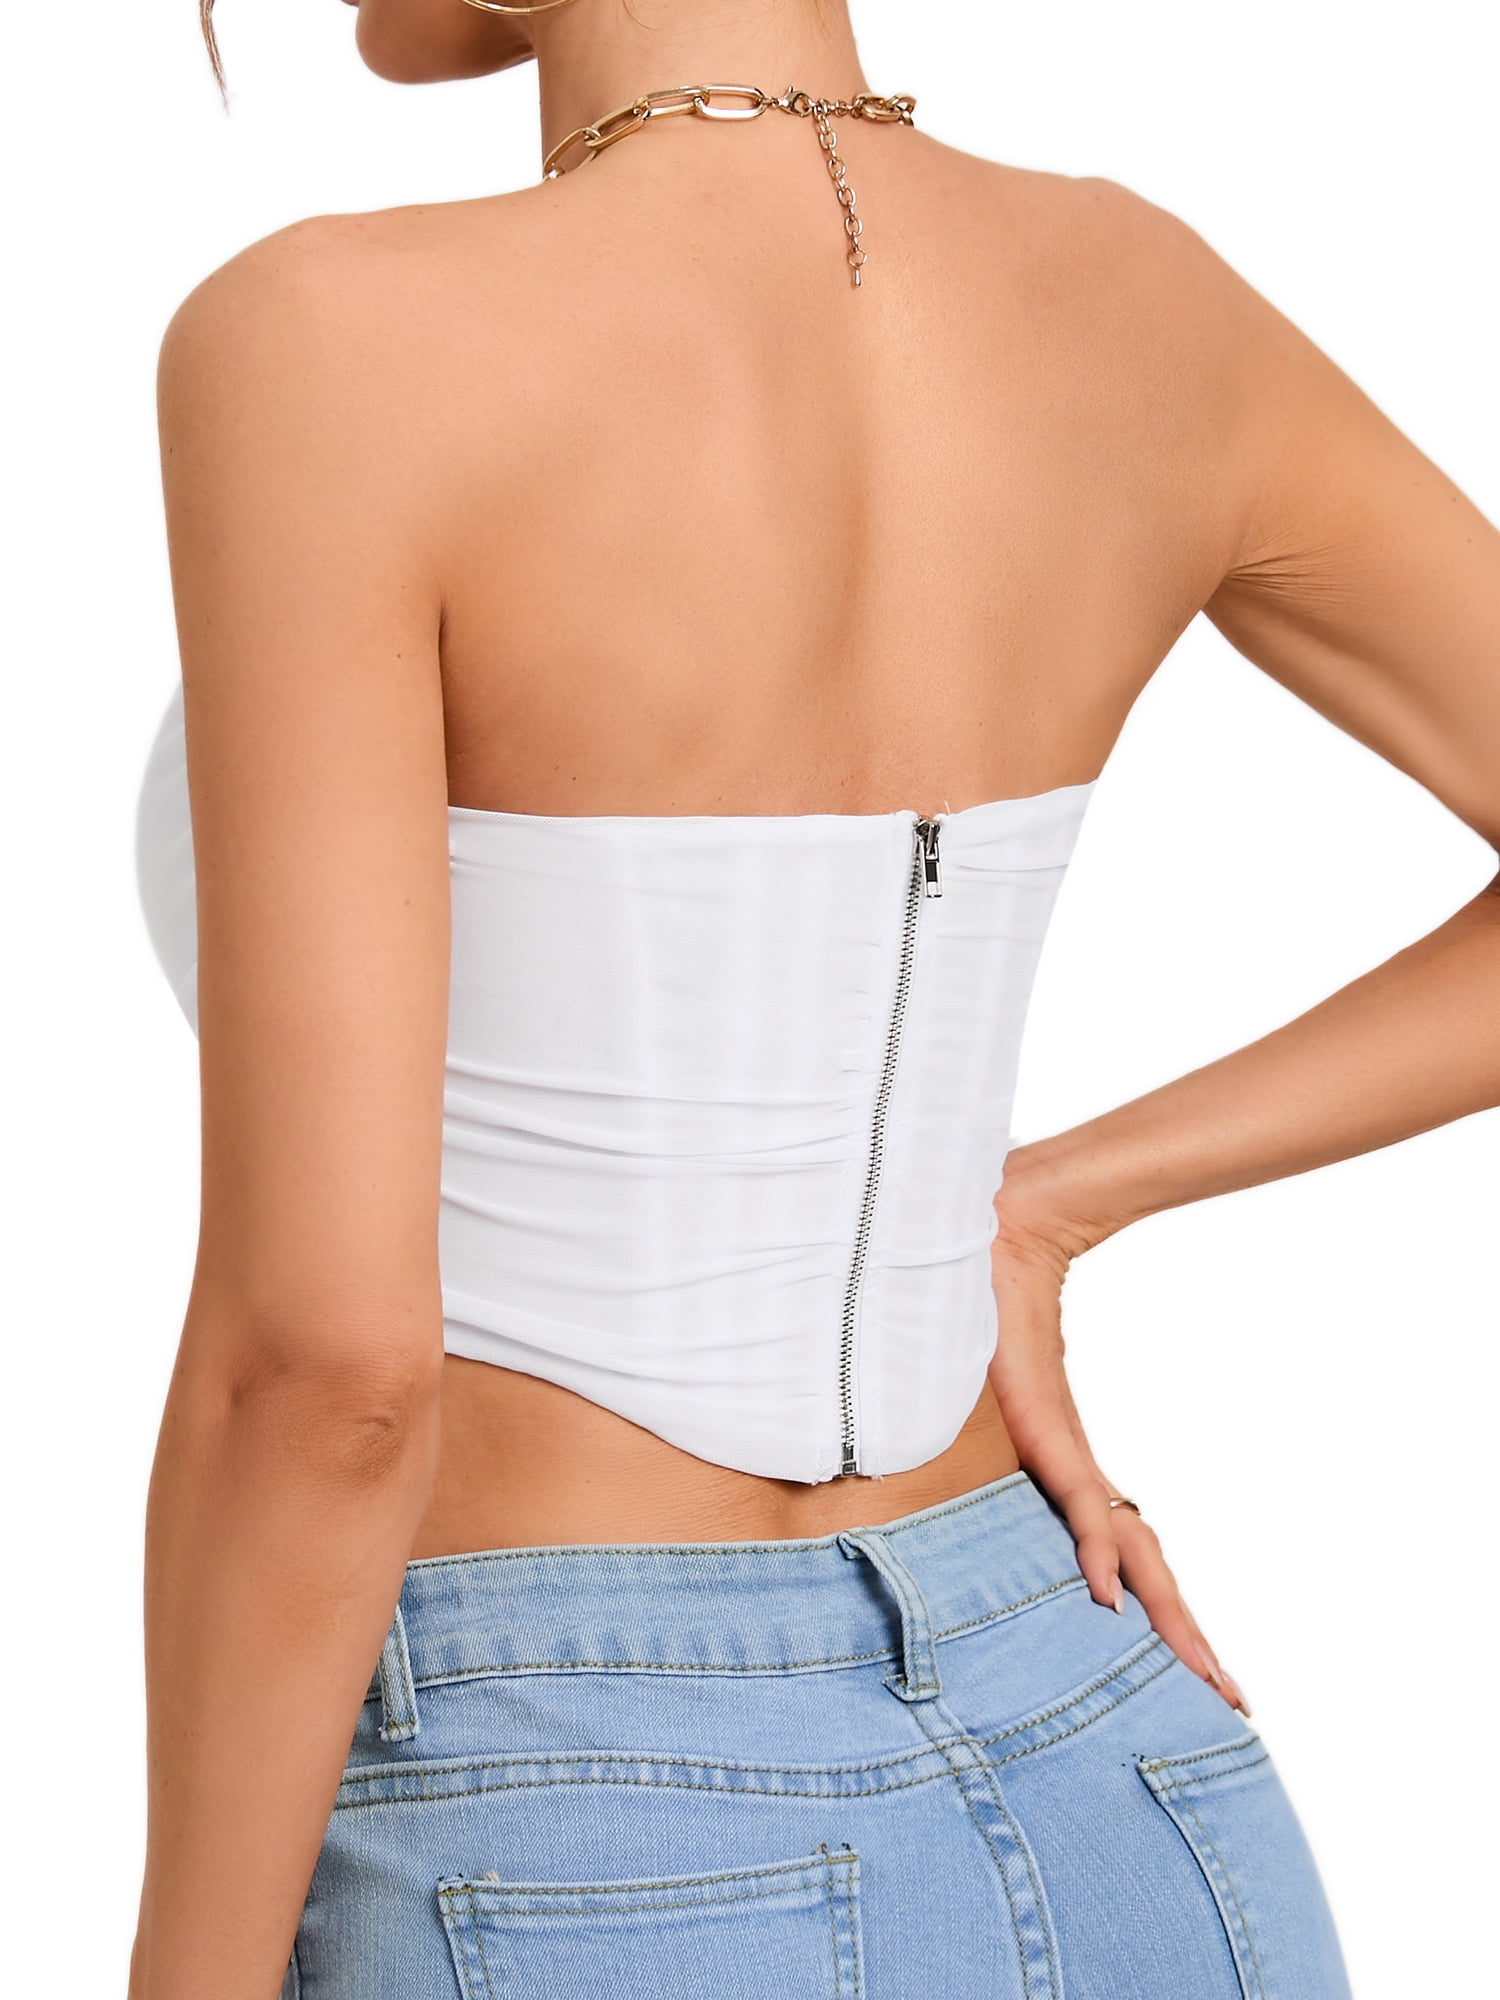 YouLoveIt Women Corset Bodyshaper Strapless Push-Up Bustier Tight Crop Top  Sleeveless Slim Zip Back Skinny Corset Top Shapewear Party Outwear